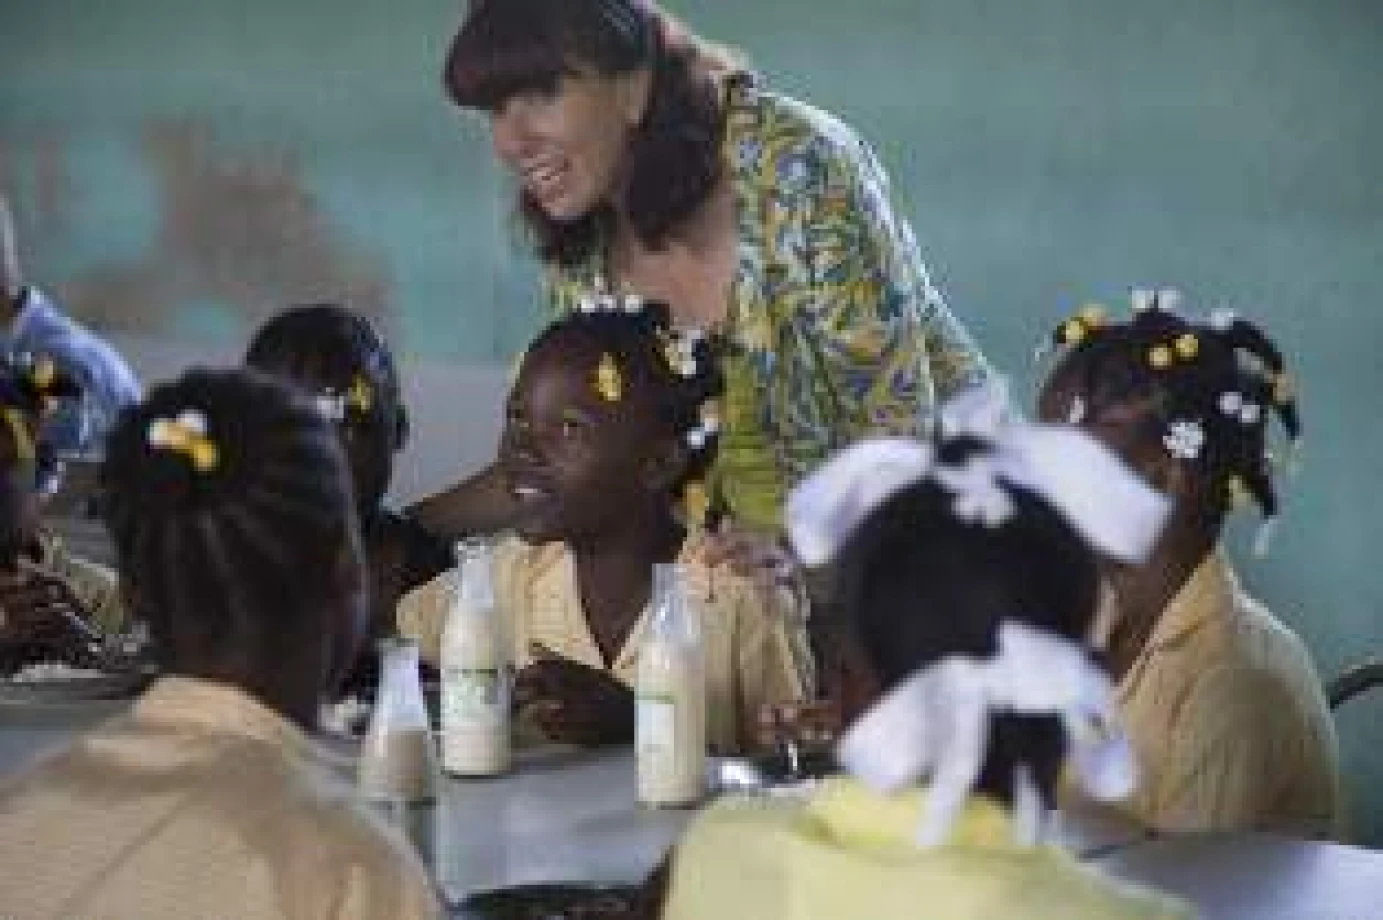 Brave Esther’s legacy helps transform lives in Haiti